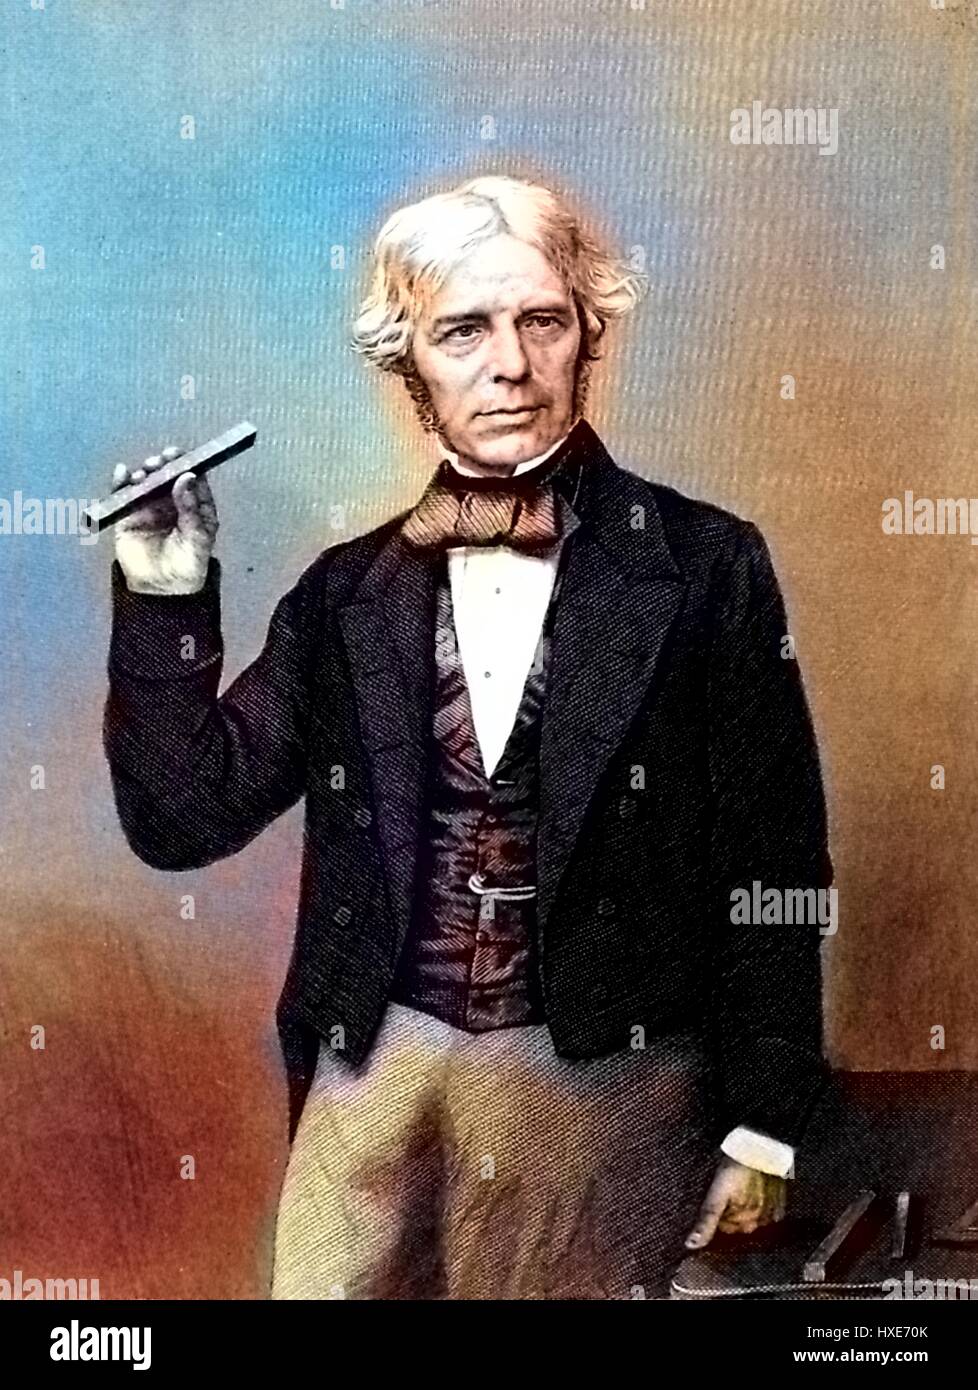 Portrait photograph of scientist Michael Faraday holding a scientific instrument and posing with his hand on a table, 1872. Note: Image has been digitally colorized using a modern process. Colors may not be period-accurate. Stock Photo